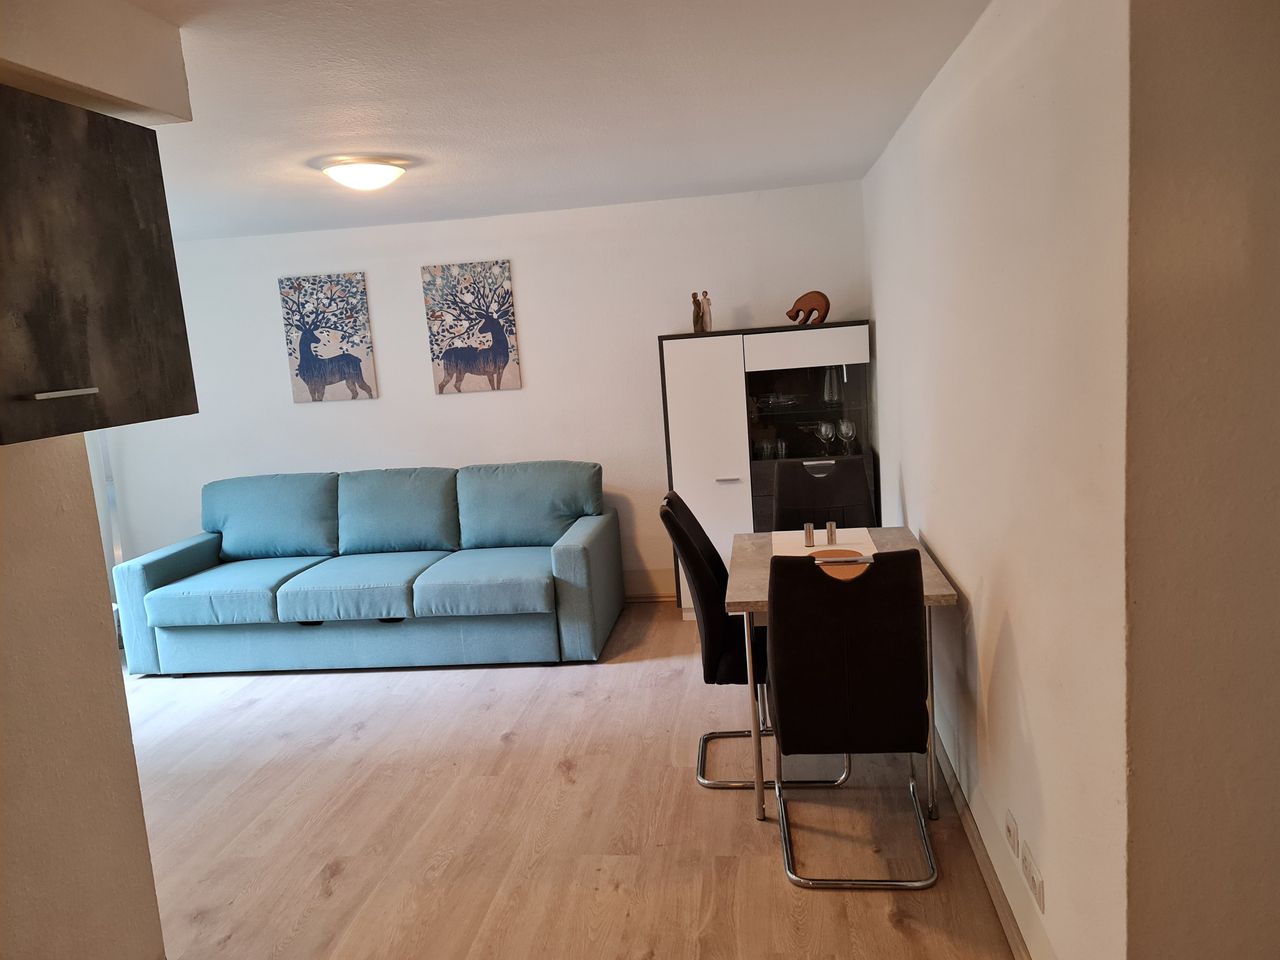 Garden - 2 Room, fully furnished, renovated appartment